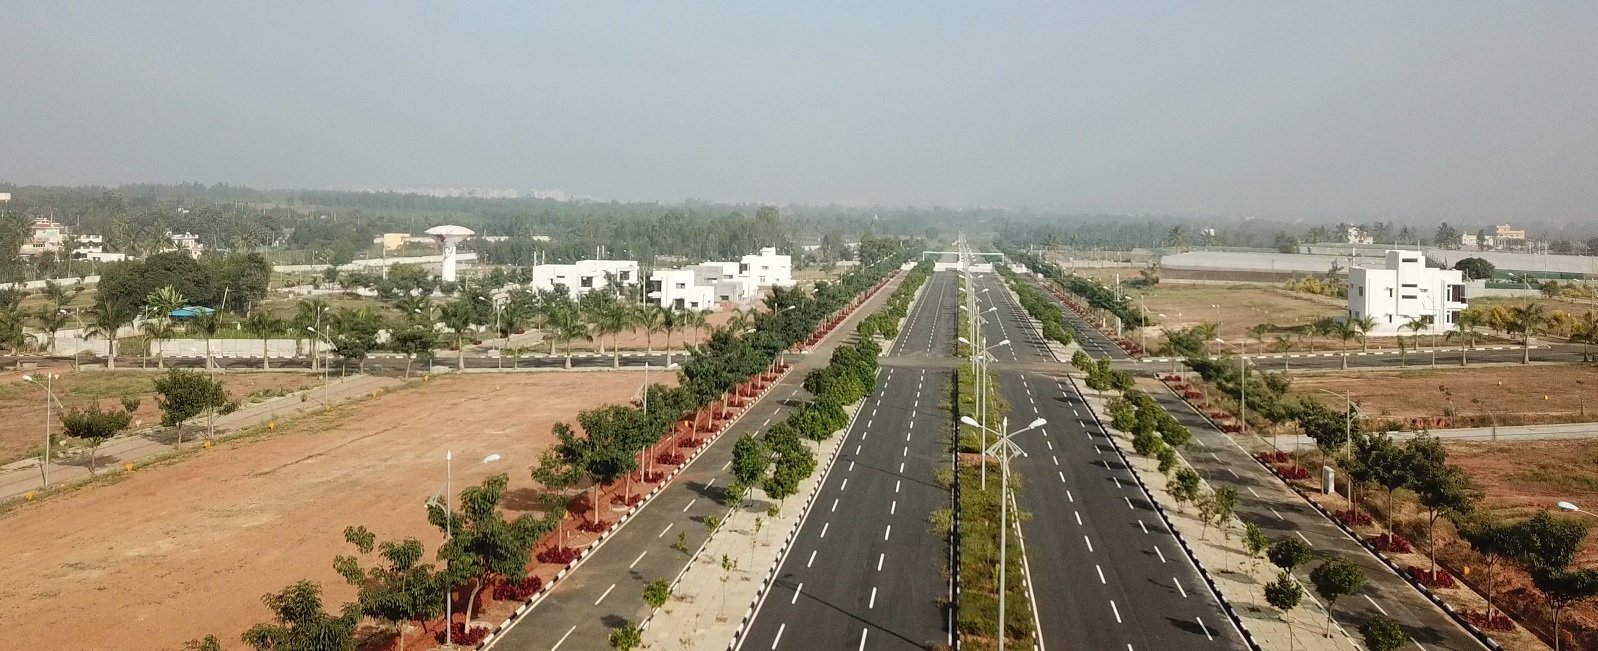 Commercial plots for sale in Bangalore